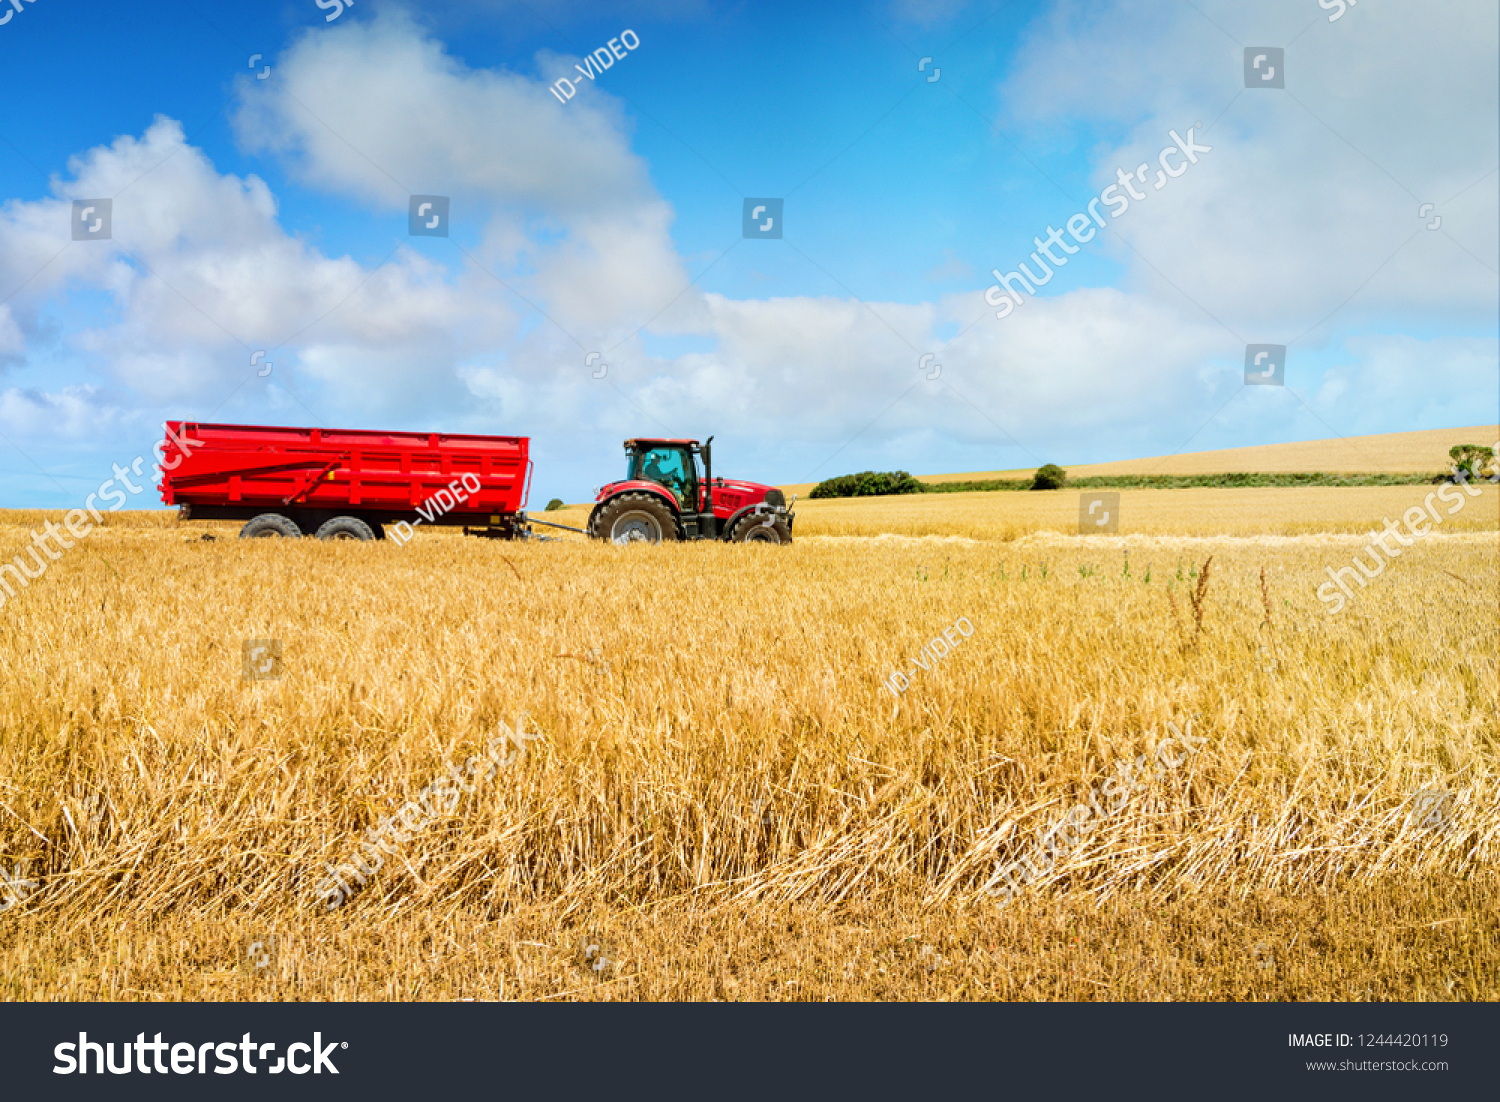 Tractor during harvest #1244420119